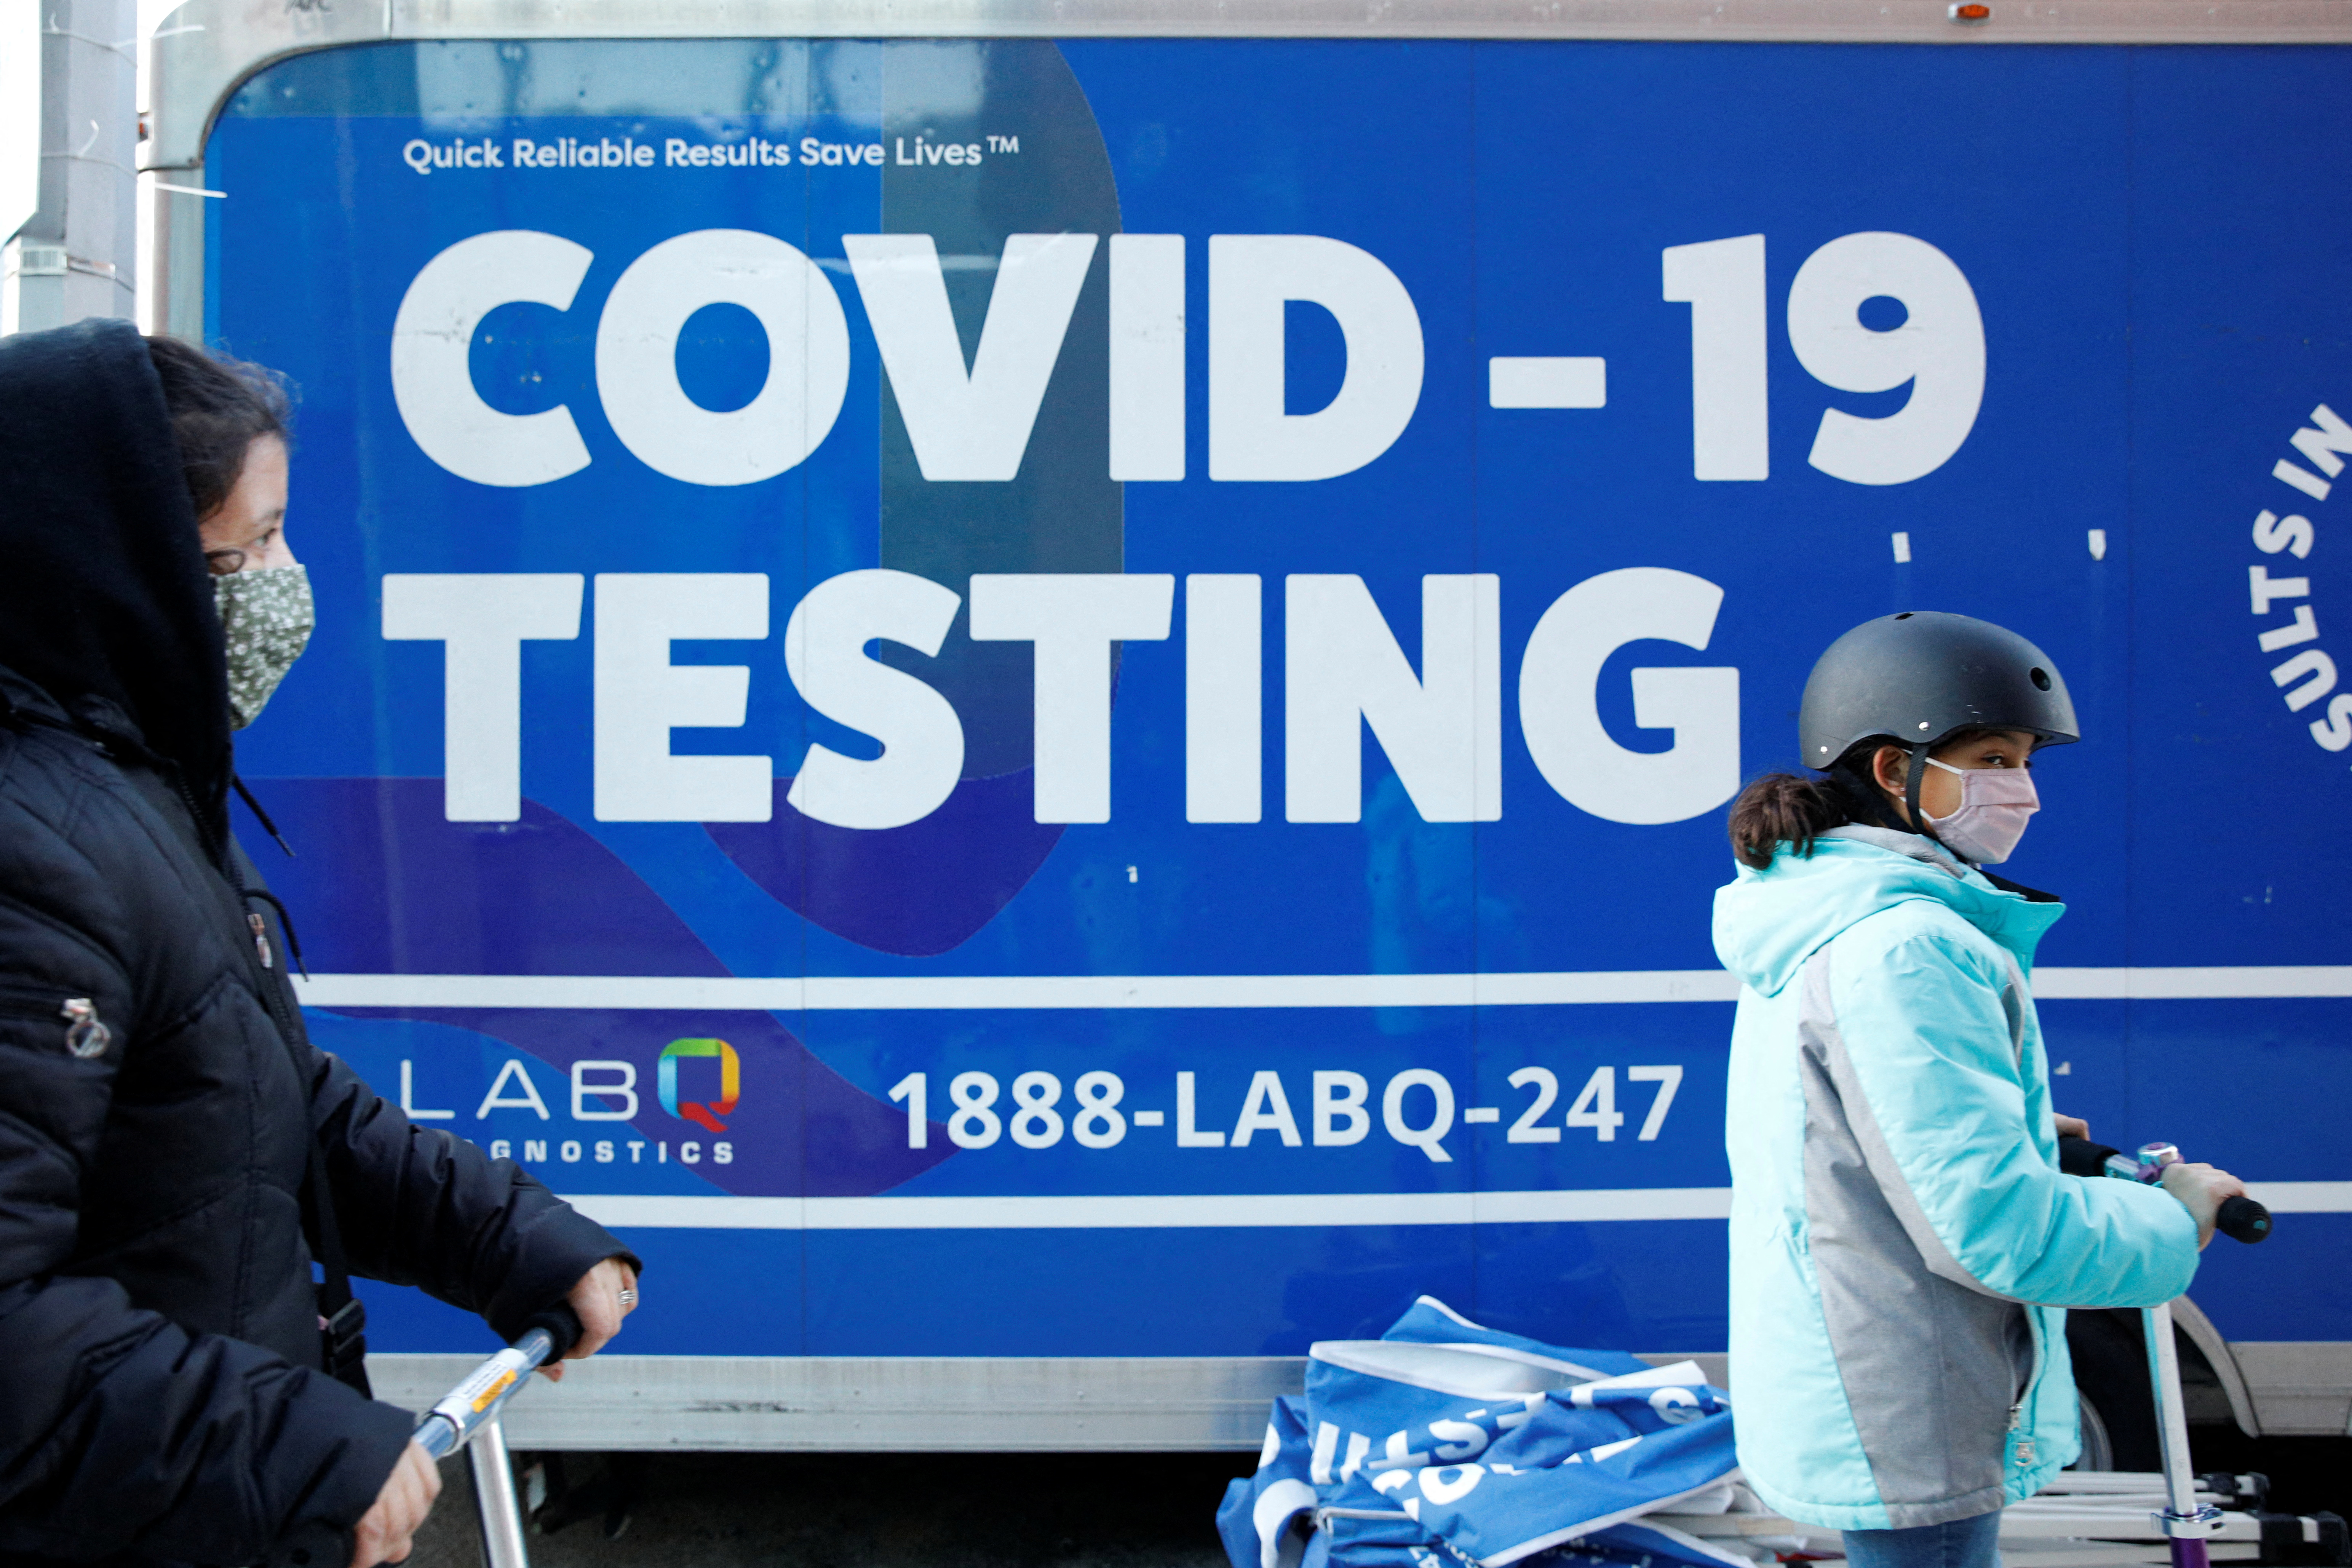 Biden directs U.S. to procure 500 million more COVID tests to meet demand